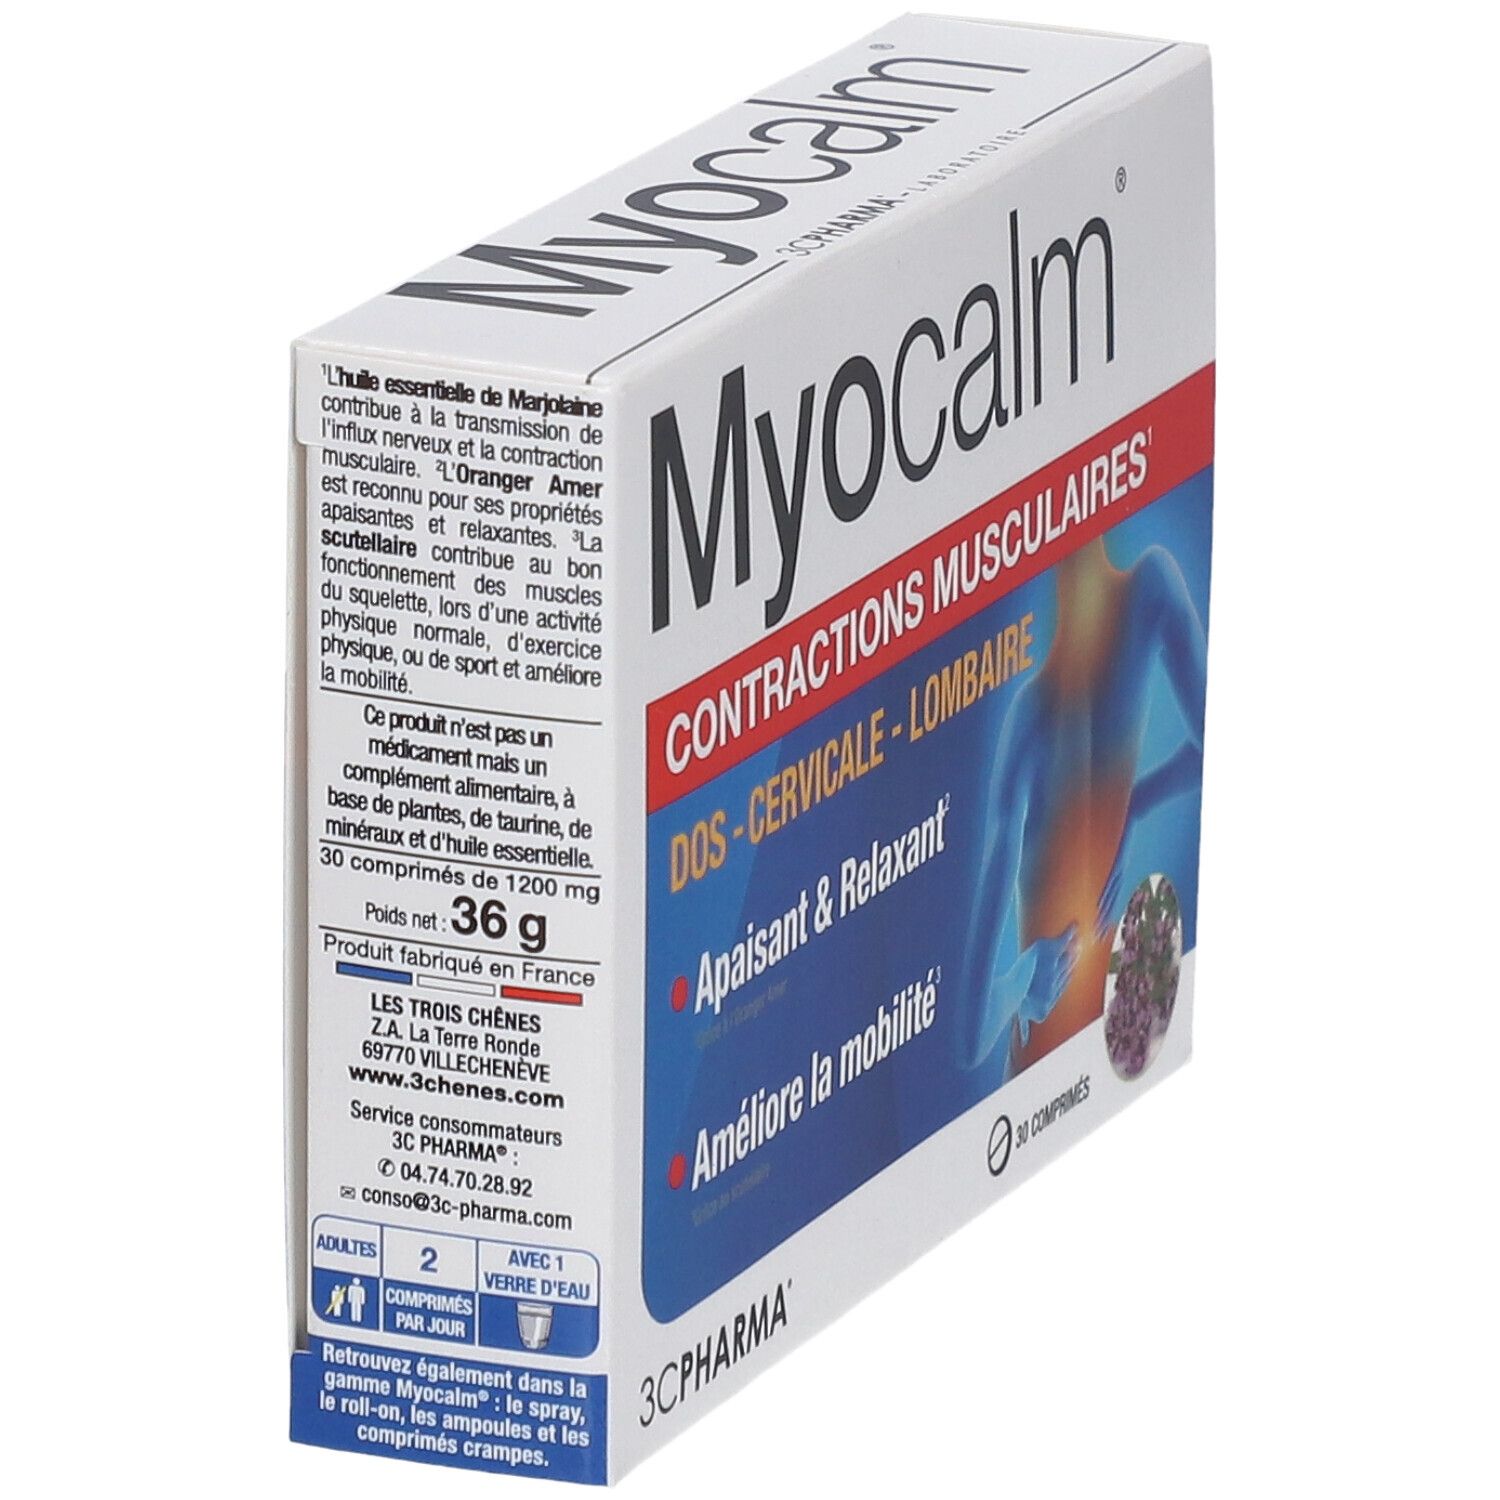 Myocalm® Contractions musculaires